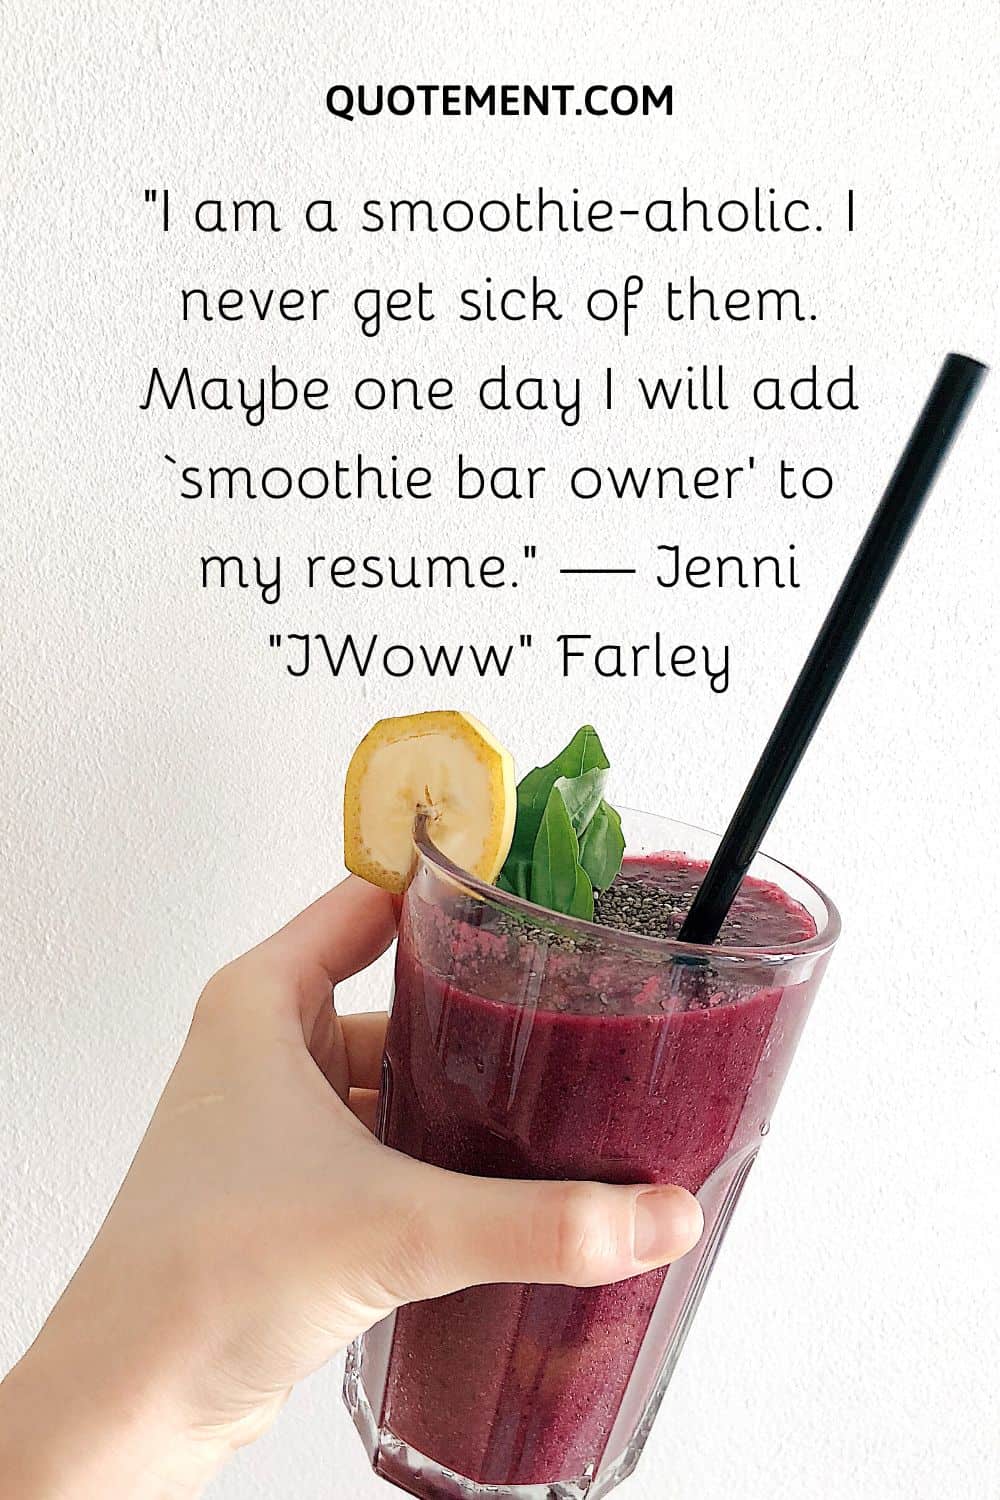 “I am a smoothie-aholic. I never get sick of them. Maybe one day I will add ‘smoothie bar owner’ to my resume.” — Jenni “JWoww” Farley